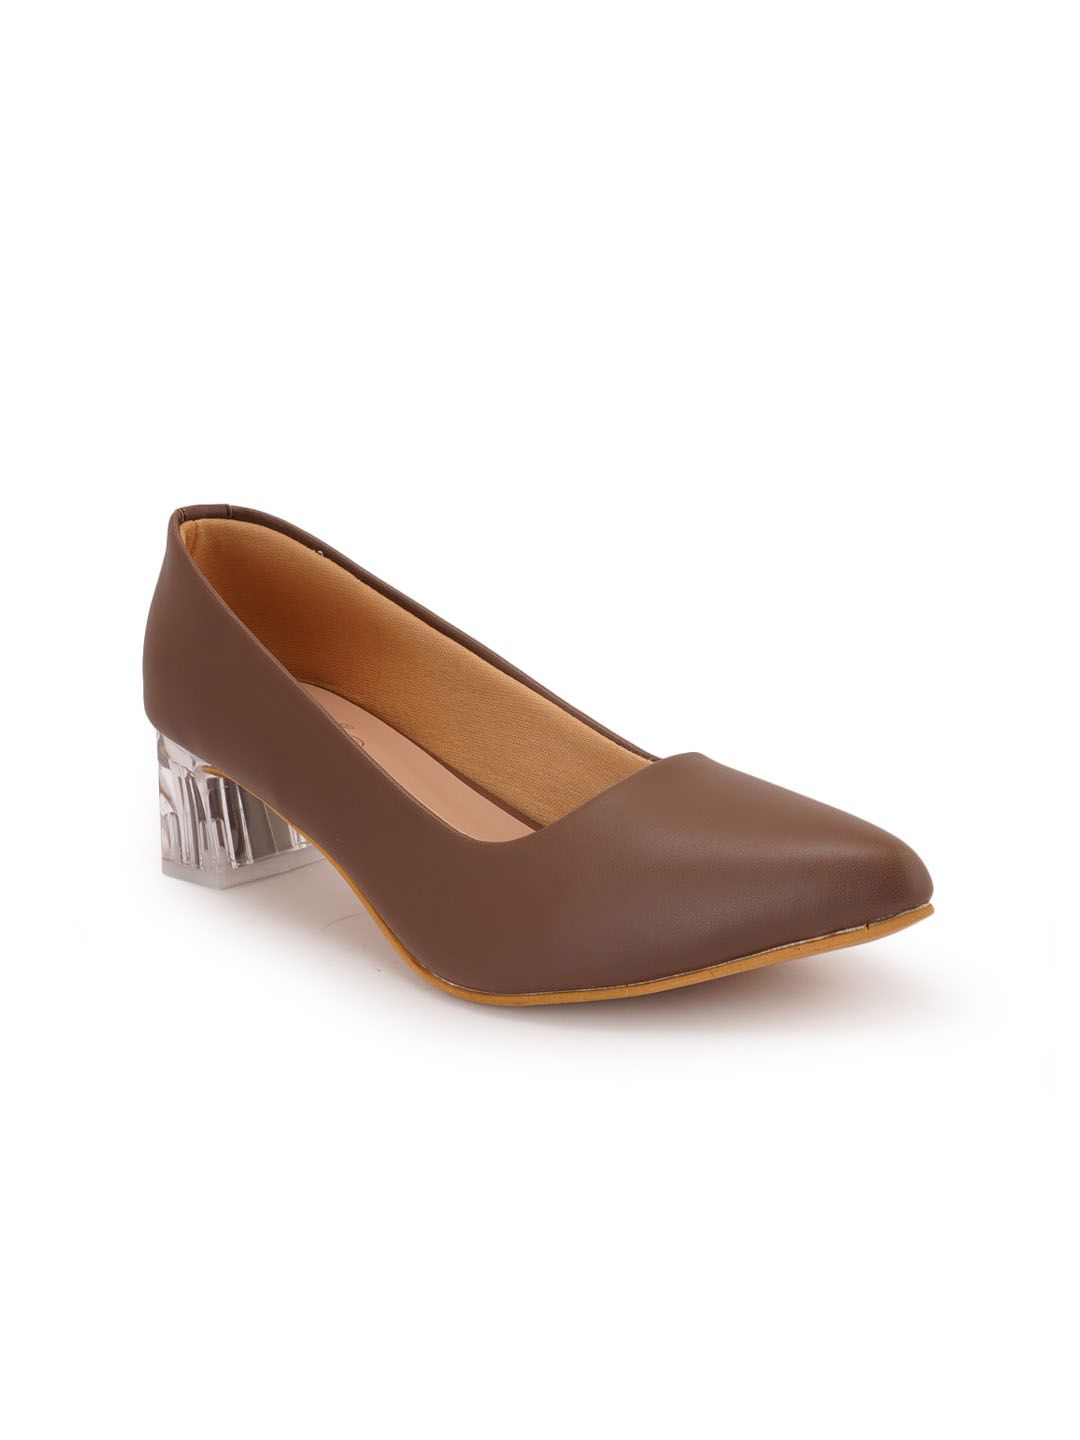 SCENTRA Brown Party Block Pumps Price in India